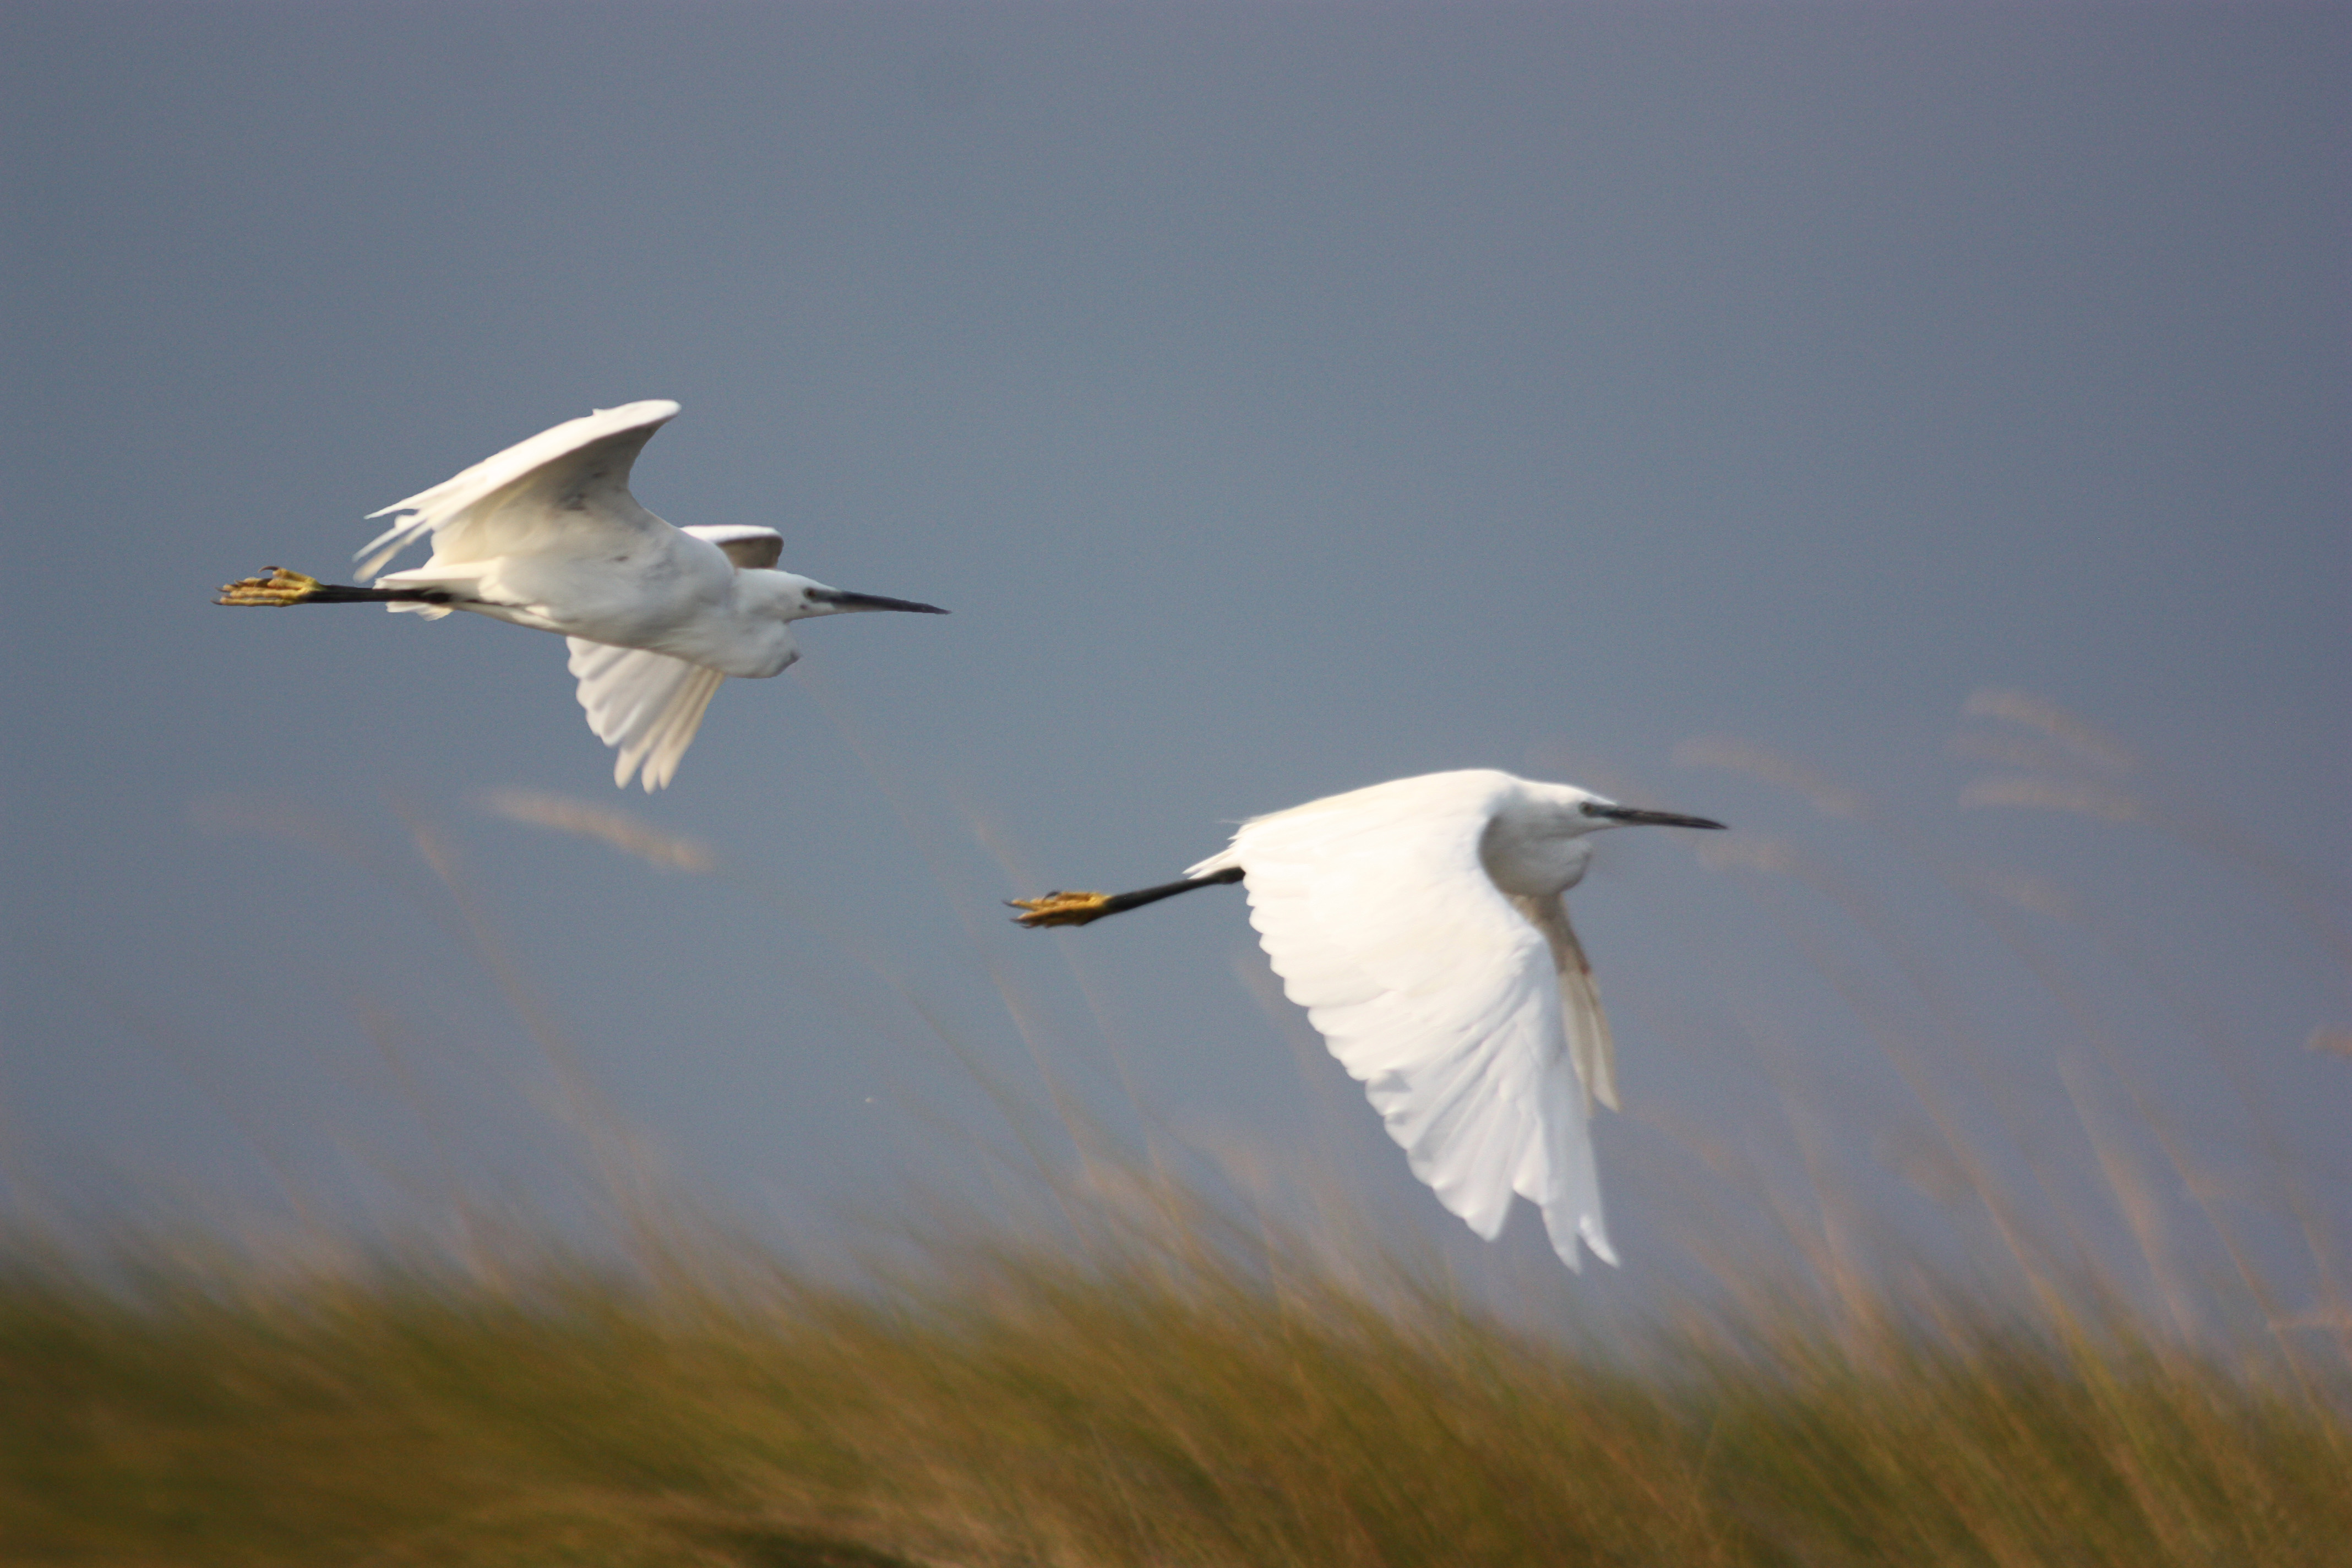 File:Little (Yellow-footed) egrets flying.jpg - Wikimedia Commons